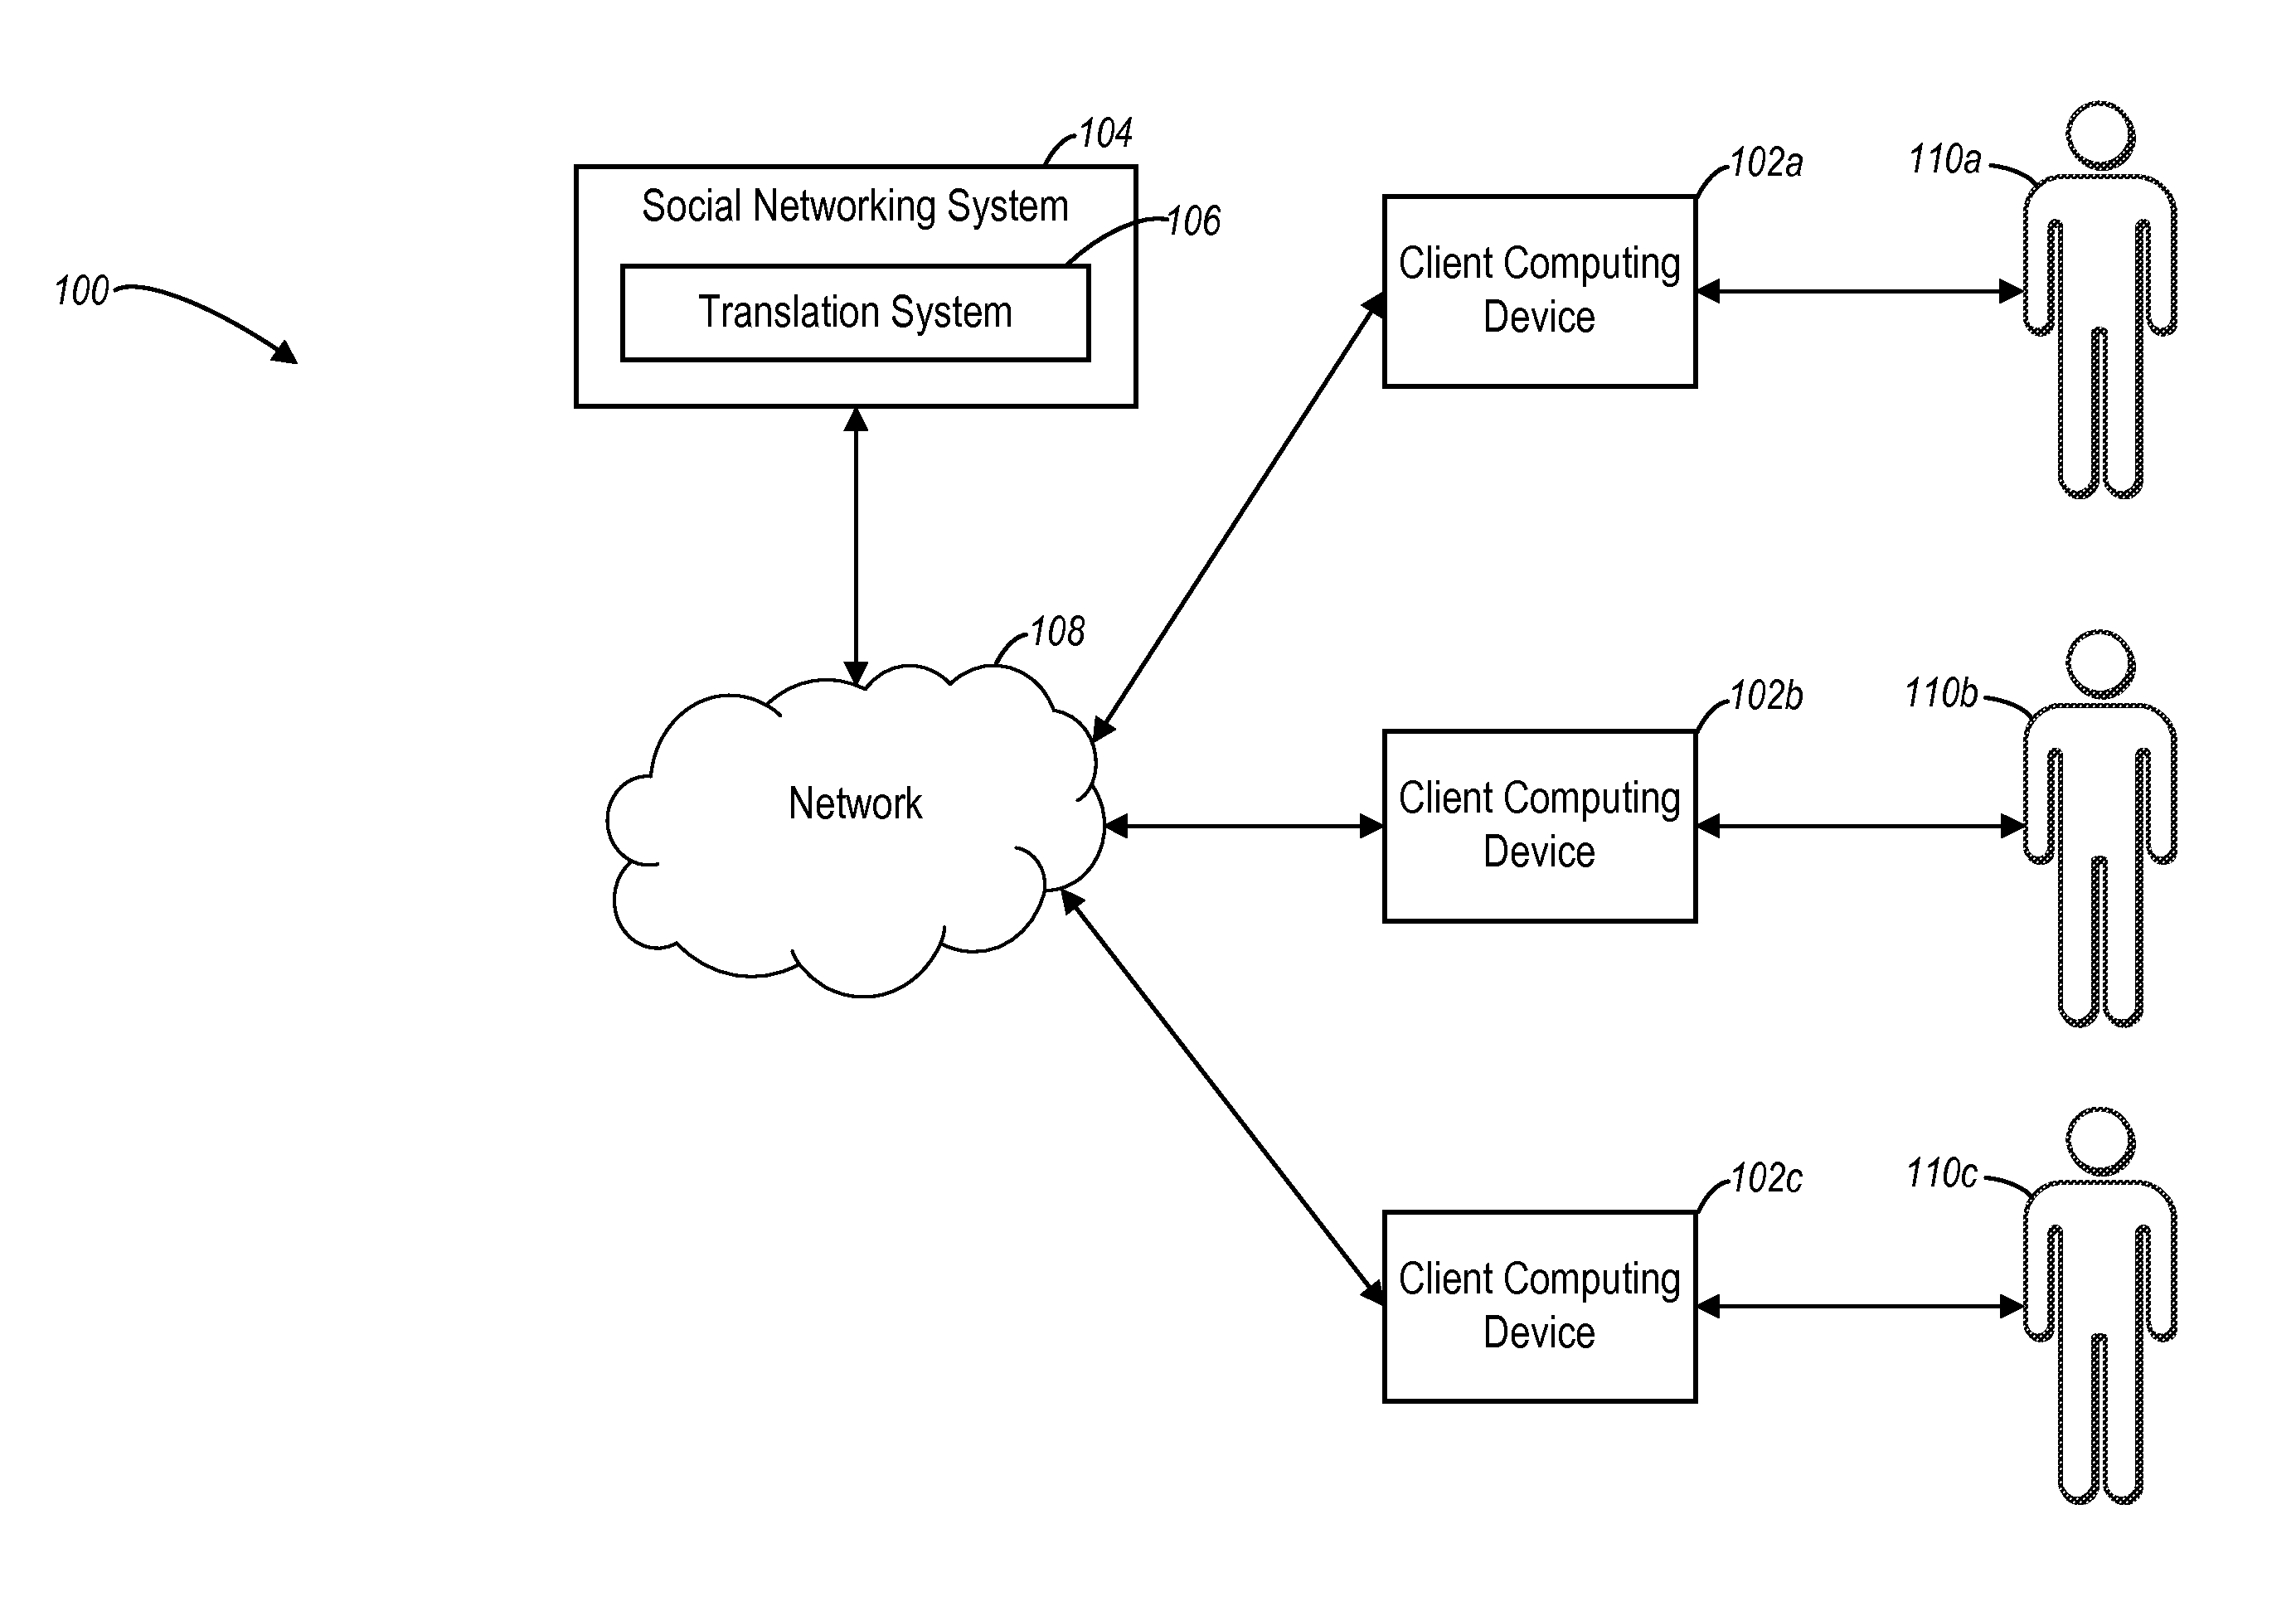 Providing translations of electronic messages via a social networking system  - US-2016191448-A1